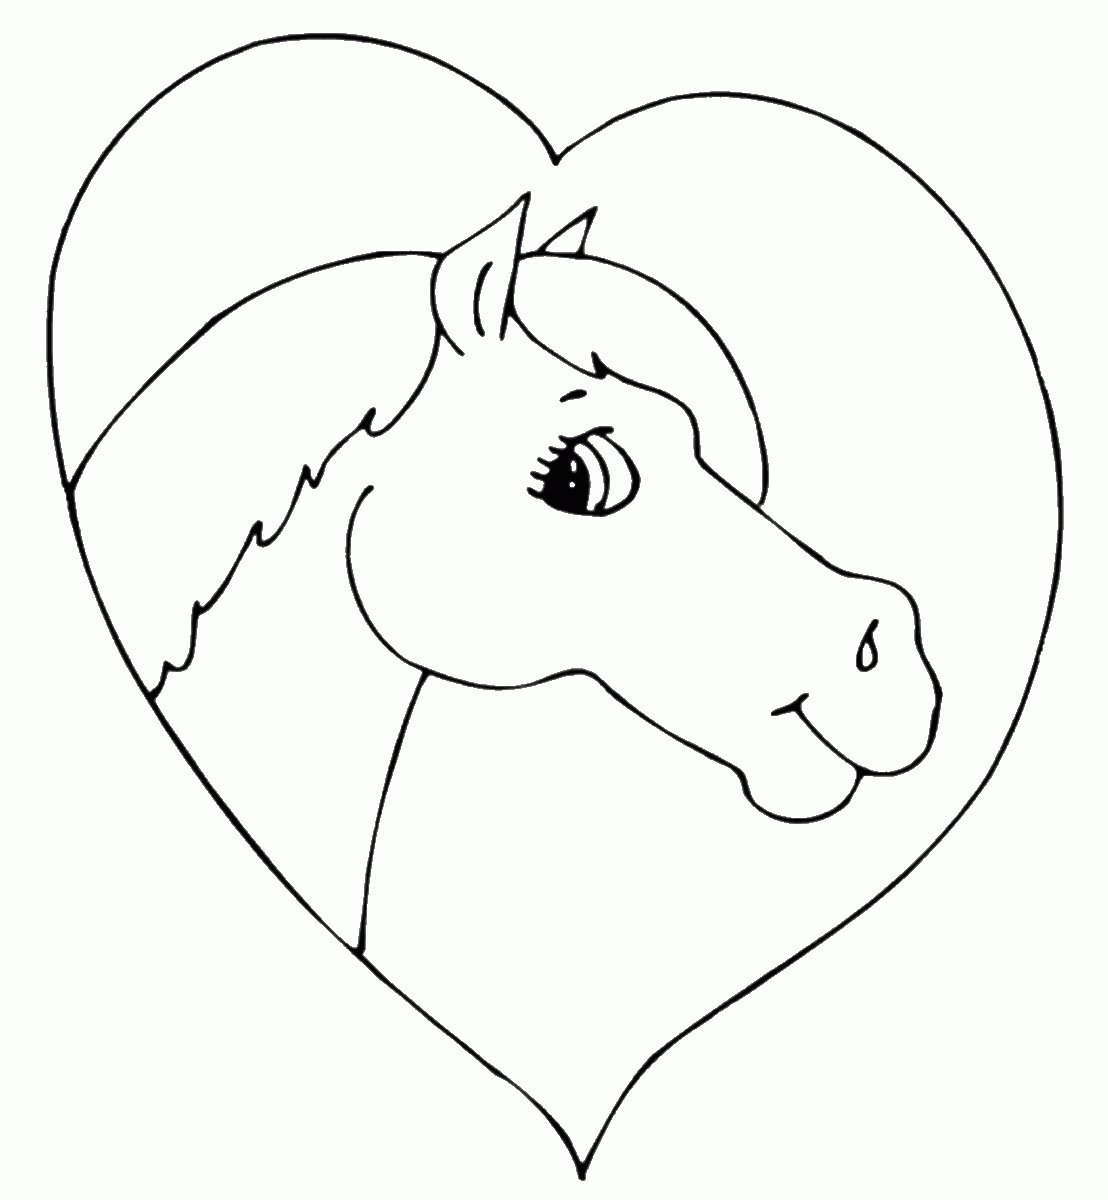 Heart Animal Coloring Pages heart horse Printable 2021 3209 Coloring4free